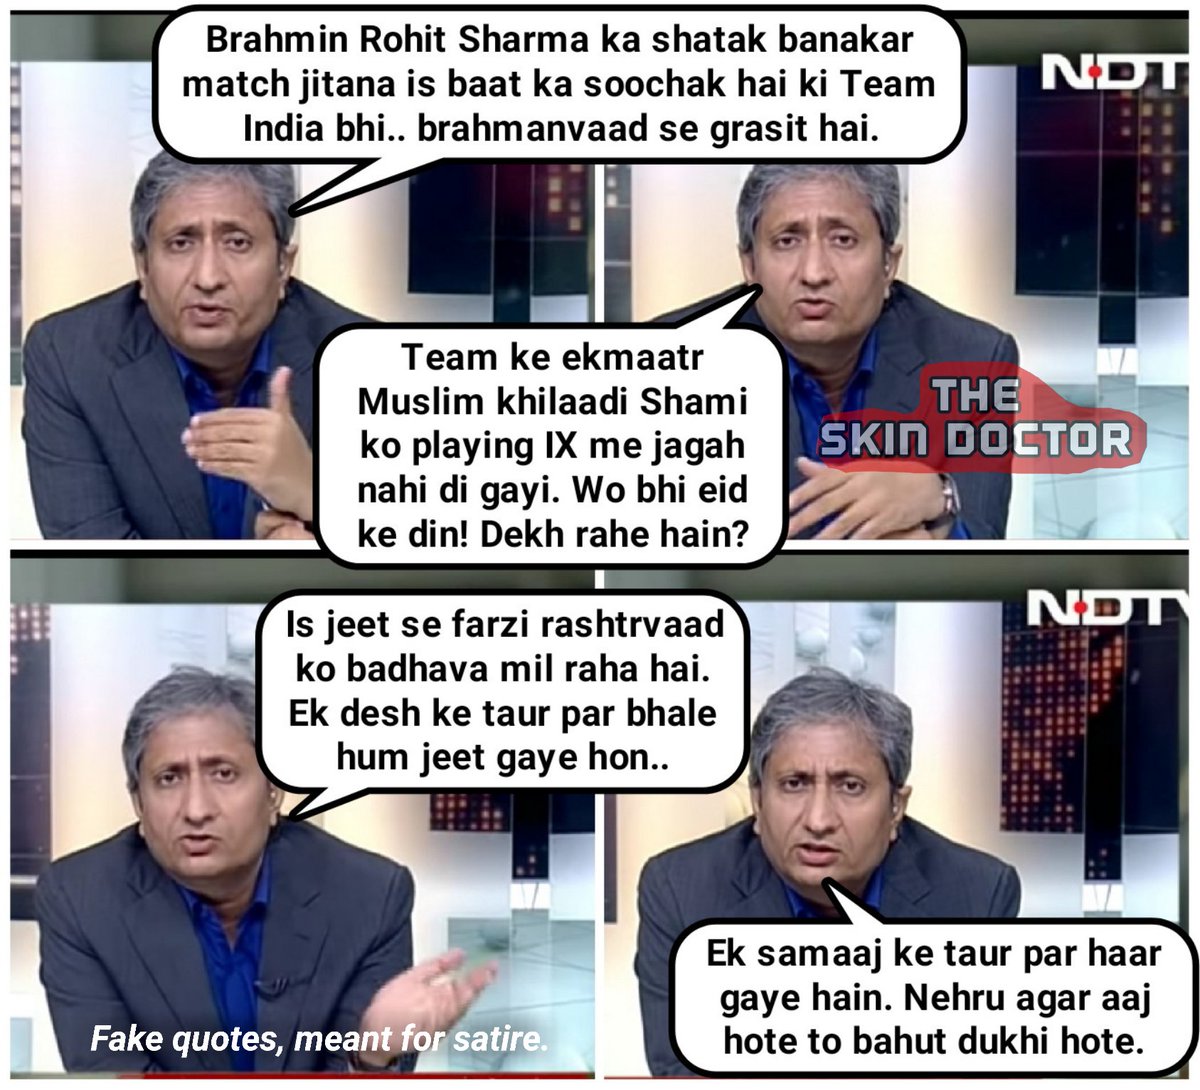 Mr Ravish Kumar giving expert opinion on India's win over South Africa in World Cup. Please read in his voice.
#INDvSA #SAvIND #TSDComics